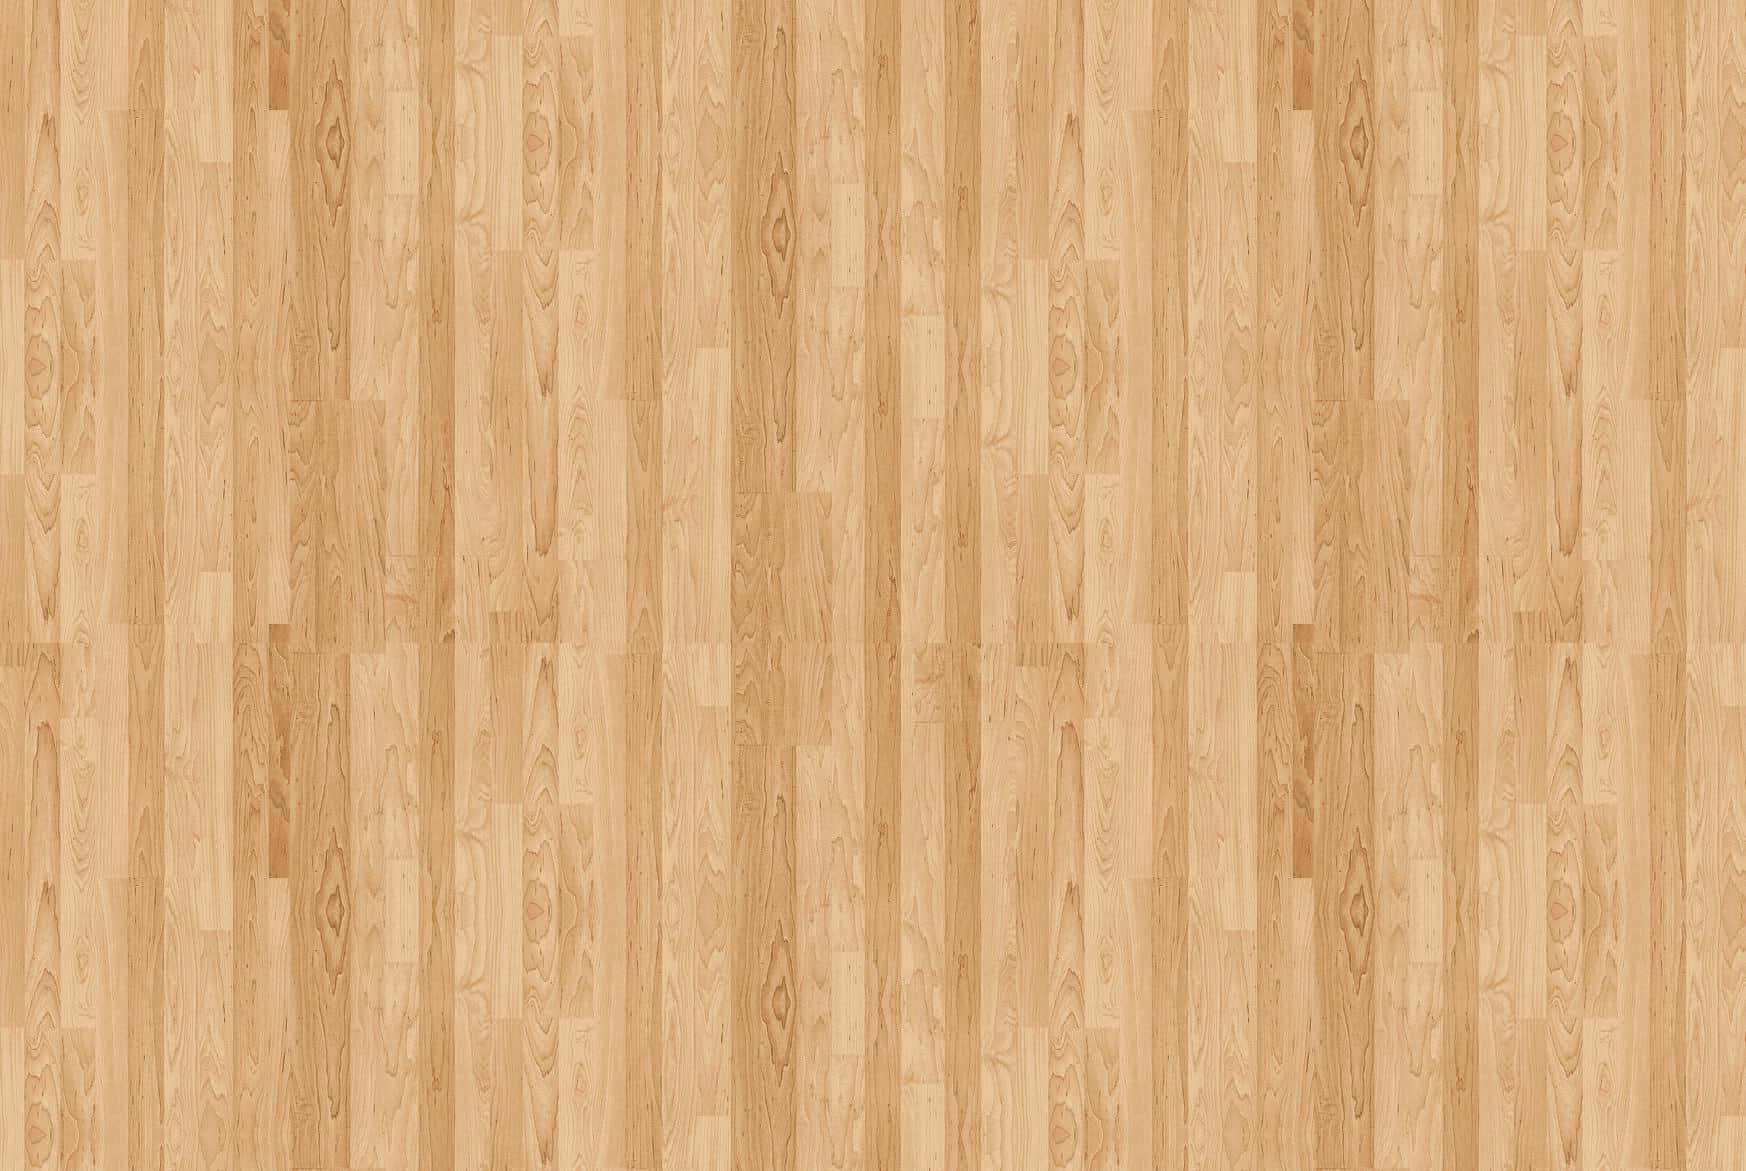 A Wooden Floor With A Wooden Pattern